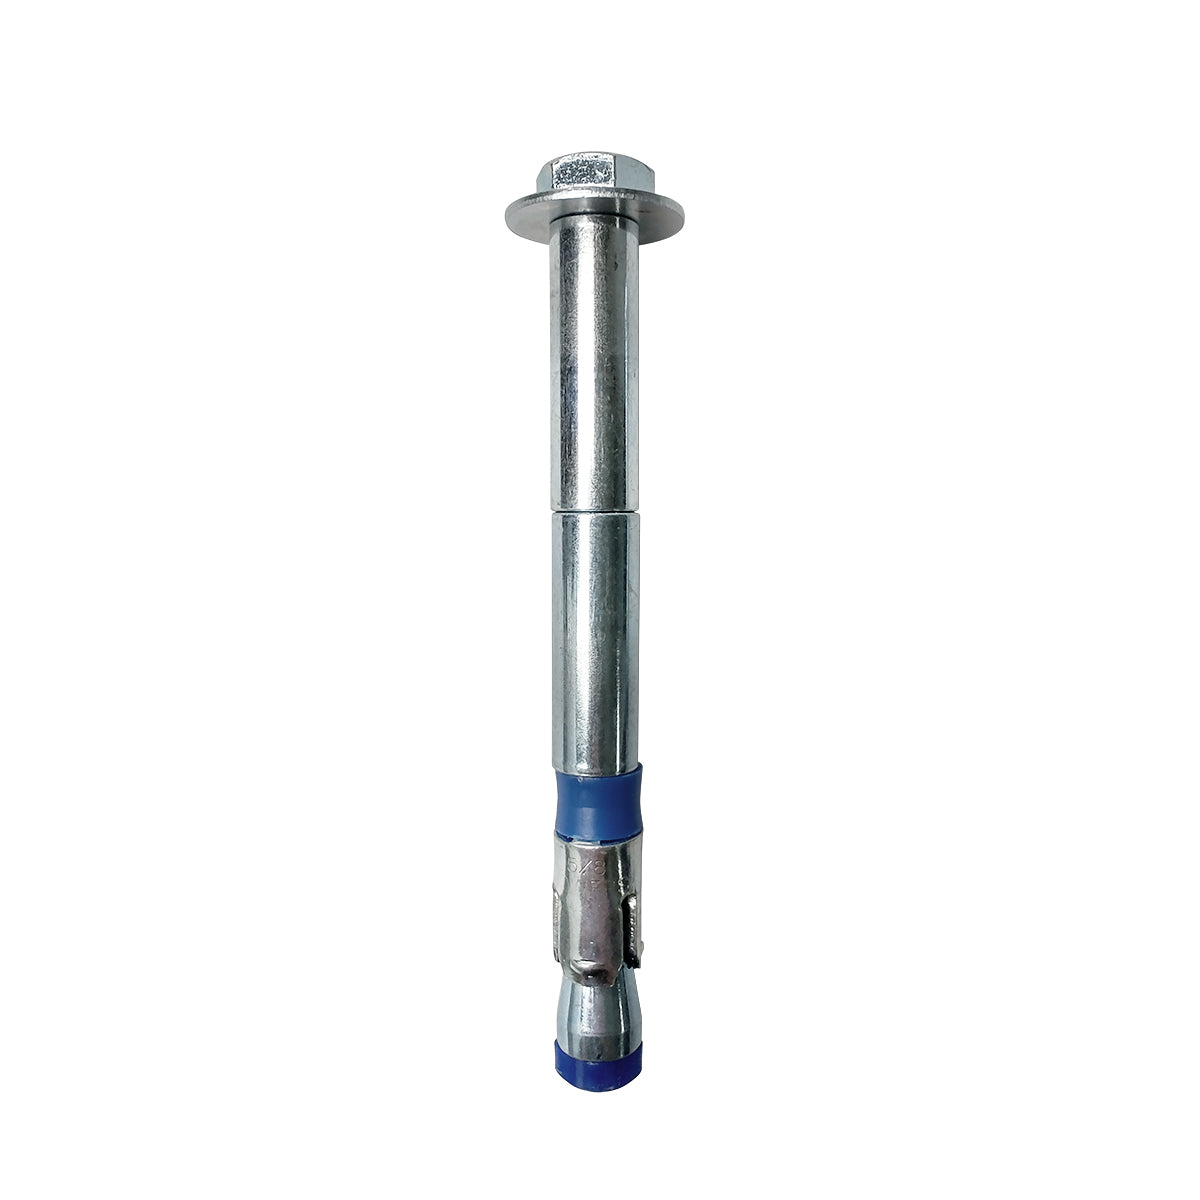 5K Replacement Concrete Wedge Bolt